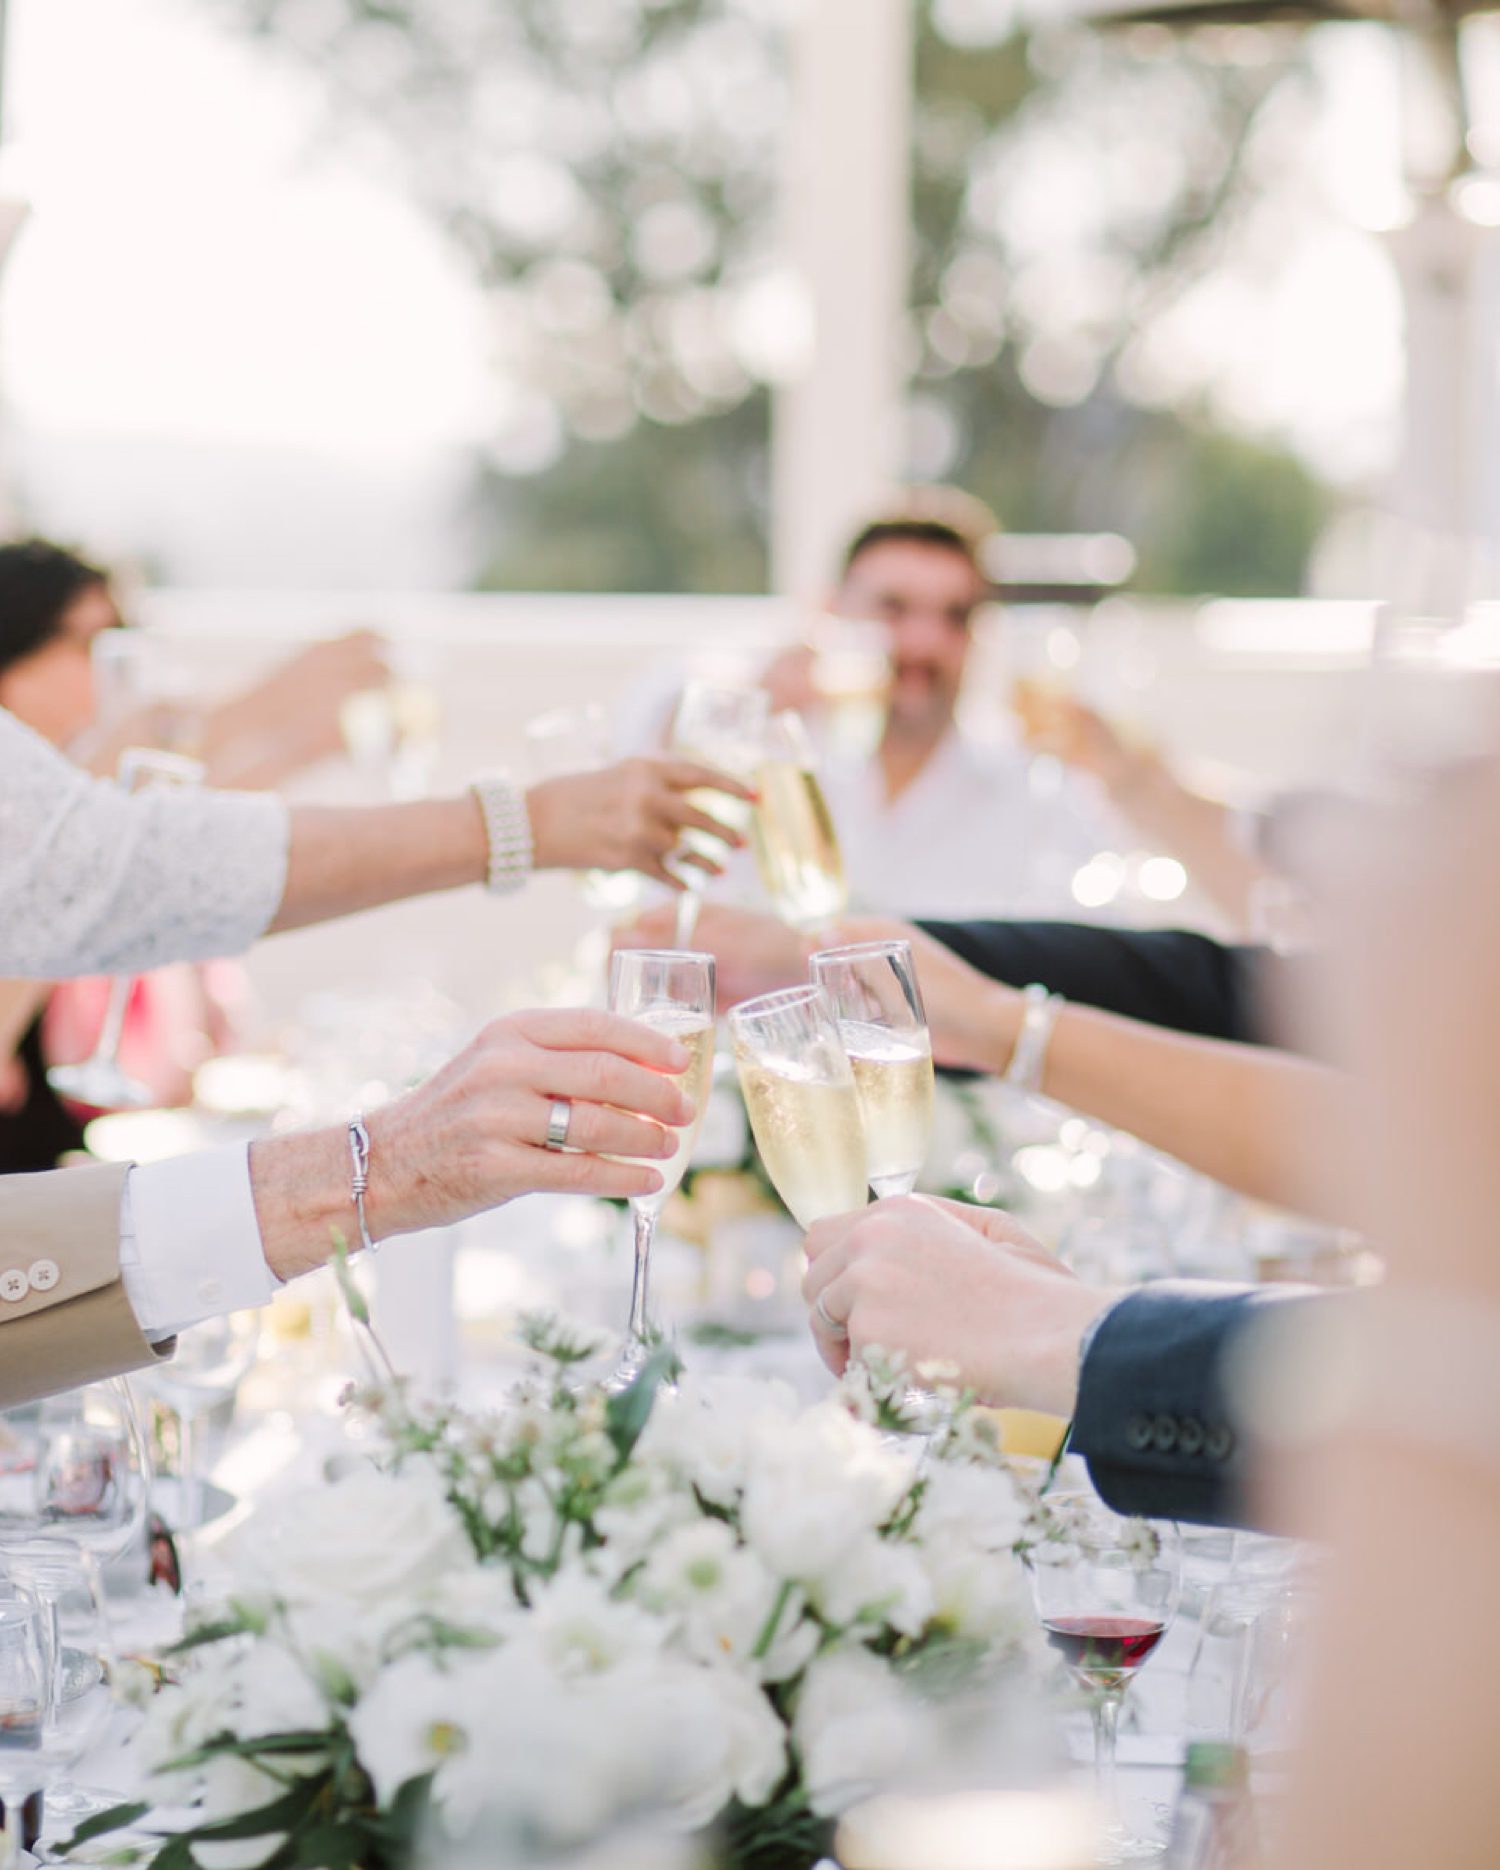 Toasting Champagne at wedding dinner party